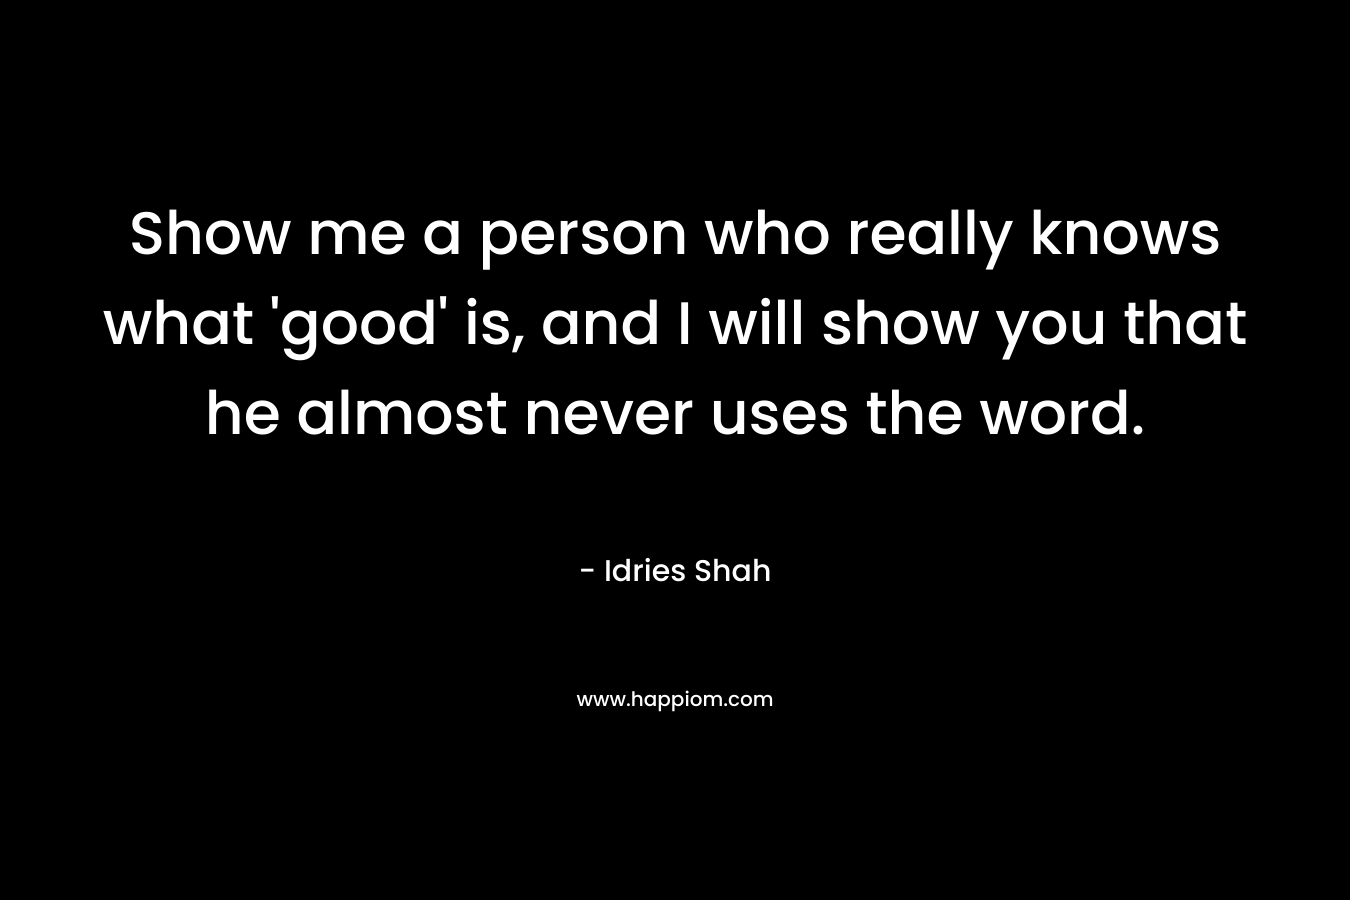 Show me a person who really knows what 'good' is, and I will show you that he almost never uses the word.